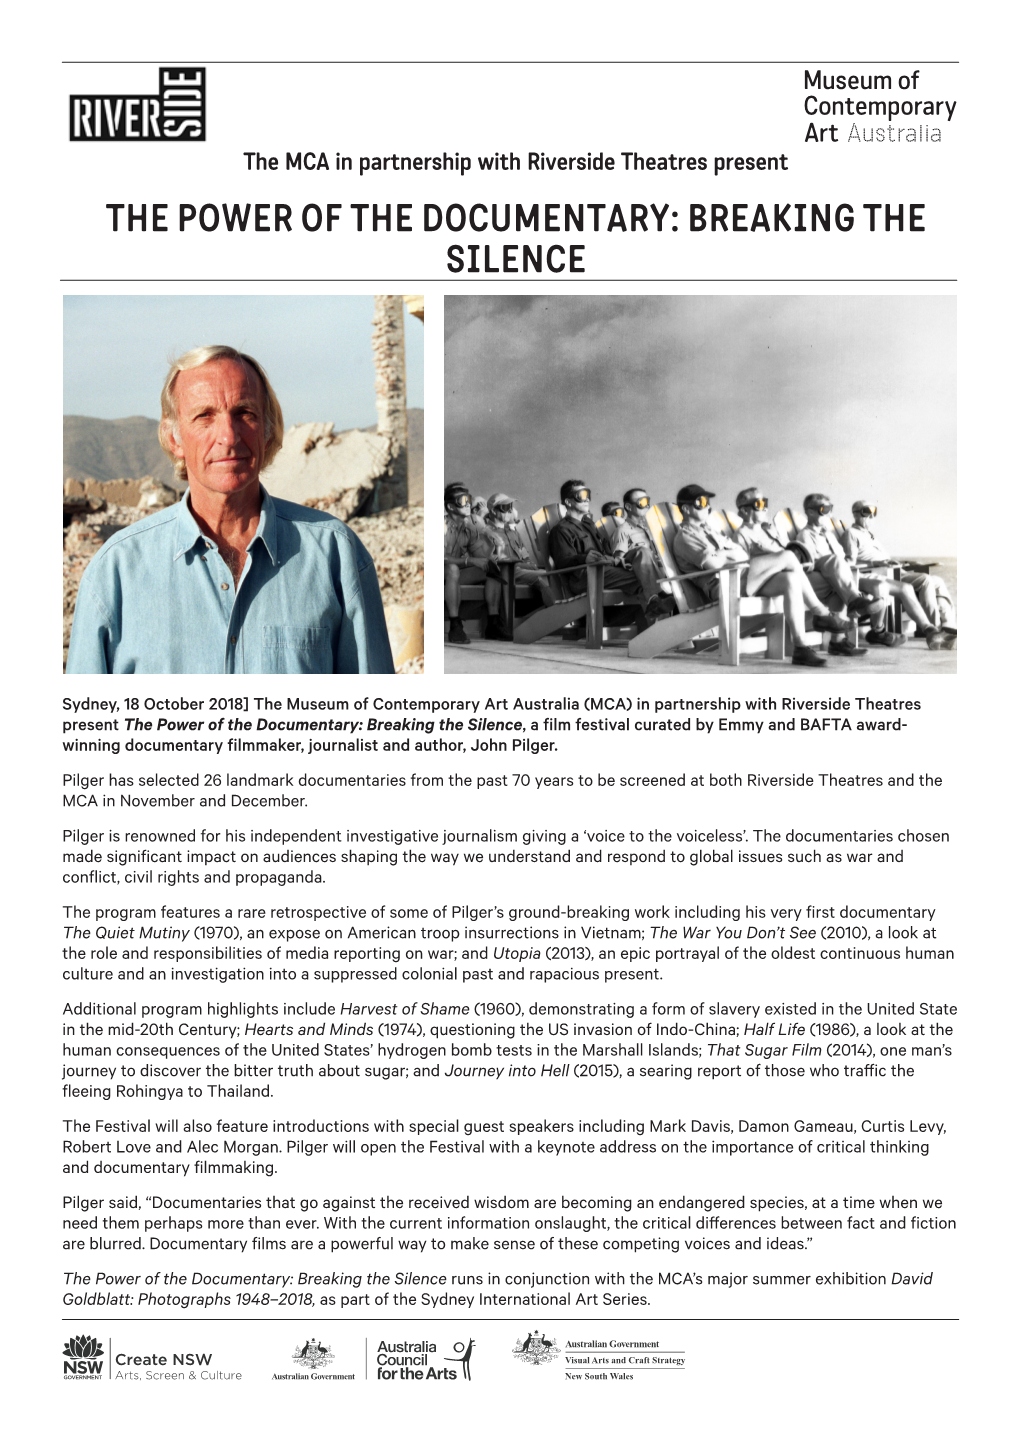 The Power of the Documentary Film Festival Curated by John Pilger Download